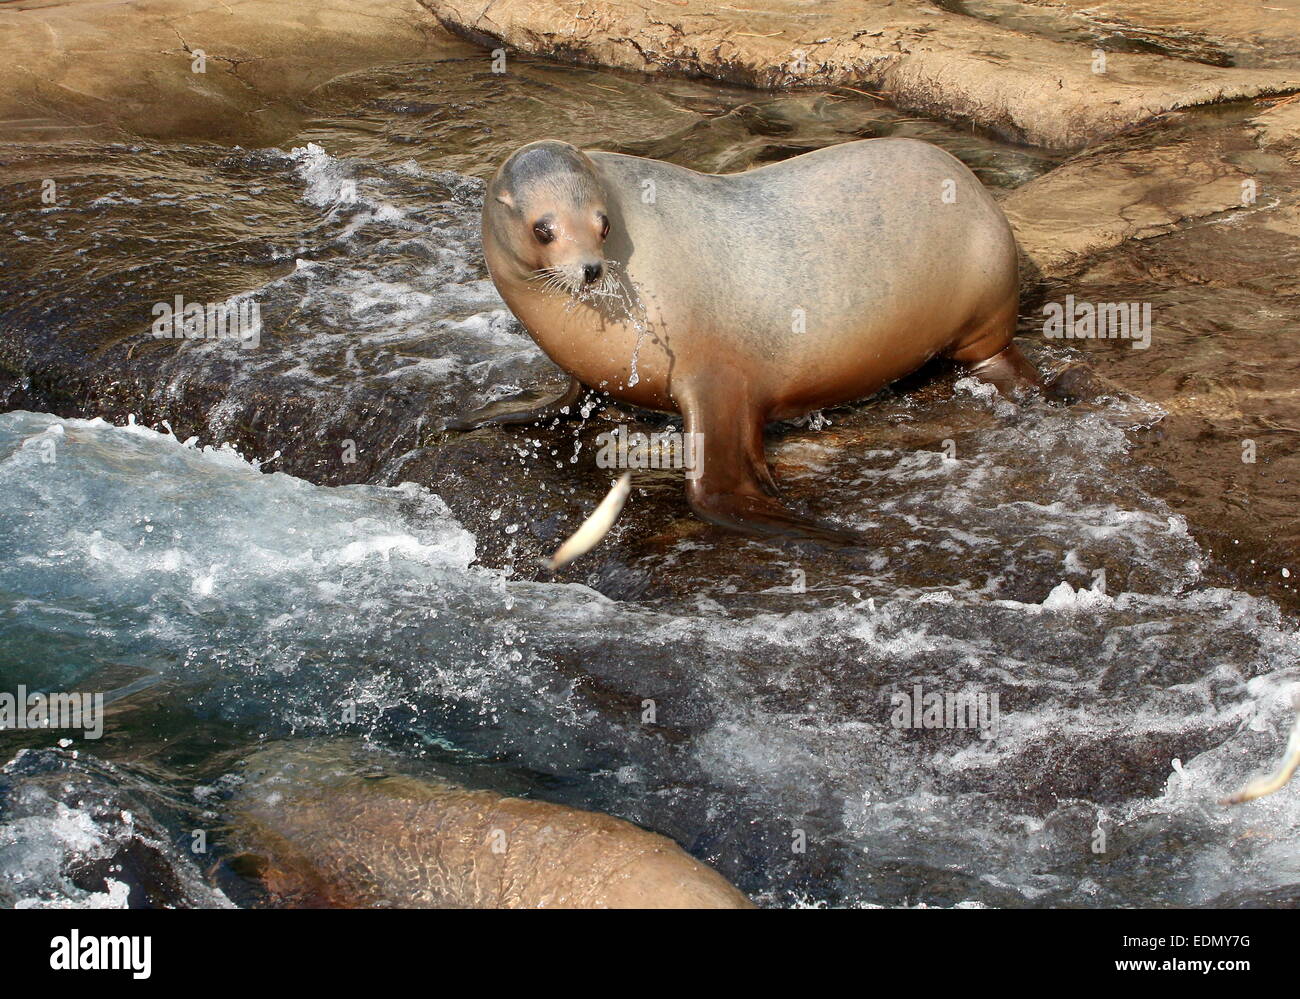 Female California sea lion (Zalophus californianus) about to catch and eat  a fish (more images in series) Stock Photo